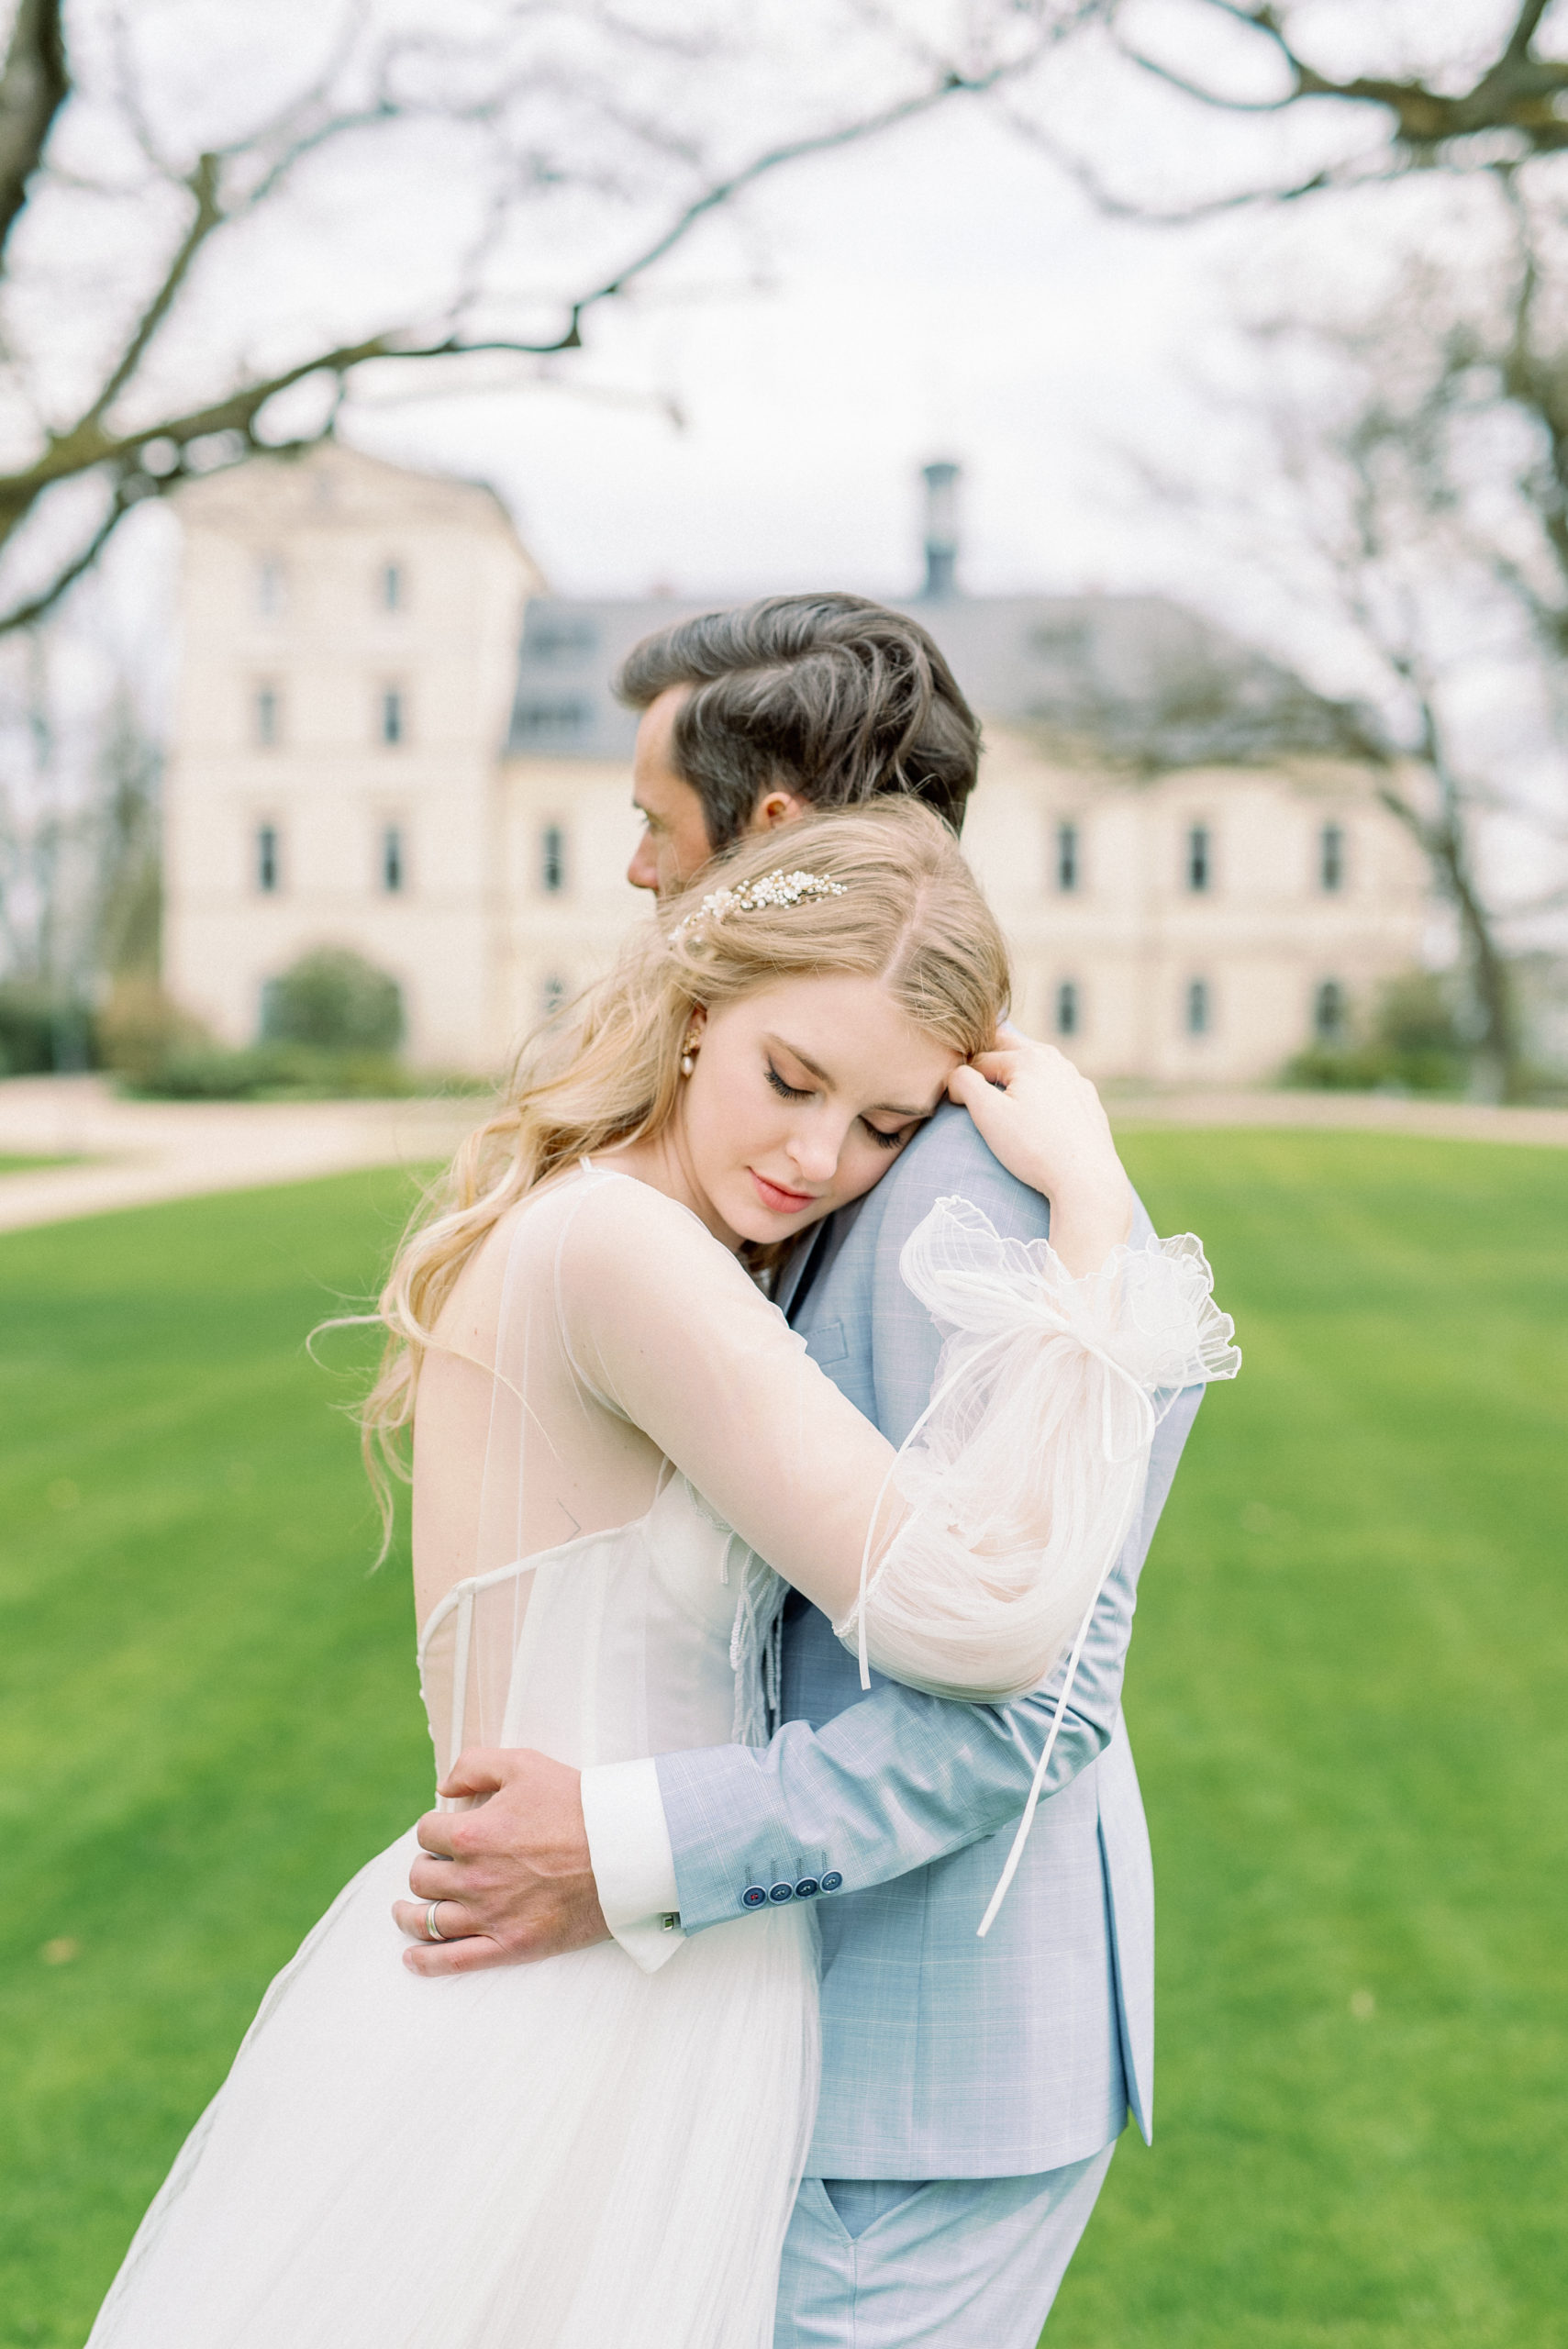 Romantic spring wedding at Chateau Mcely